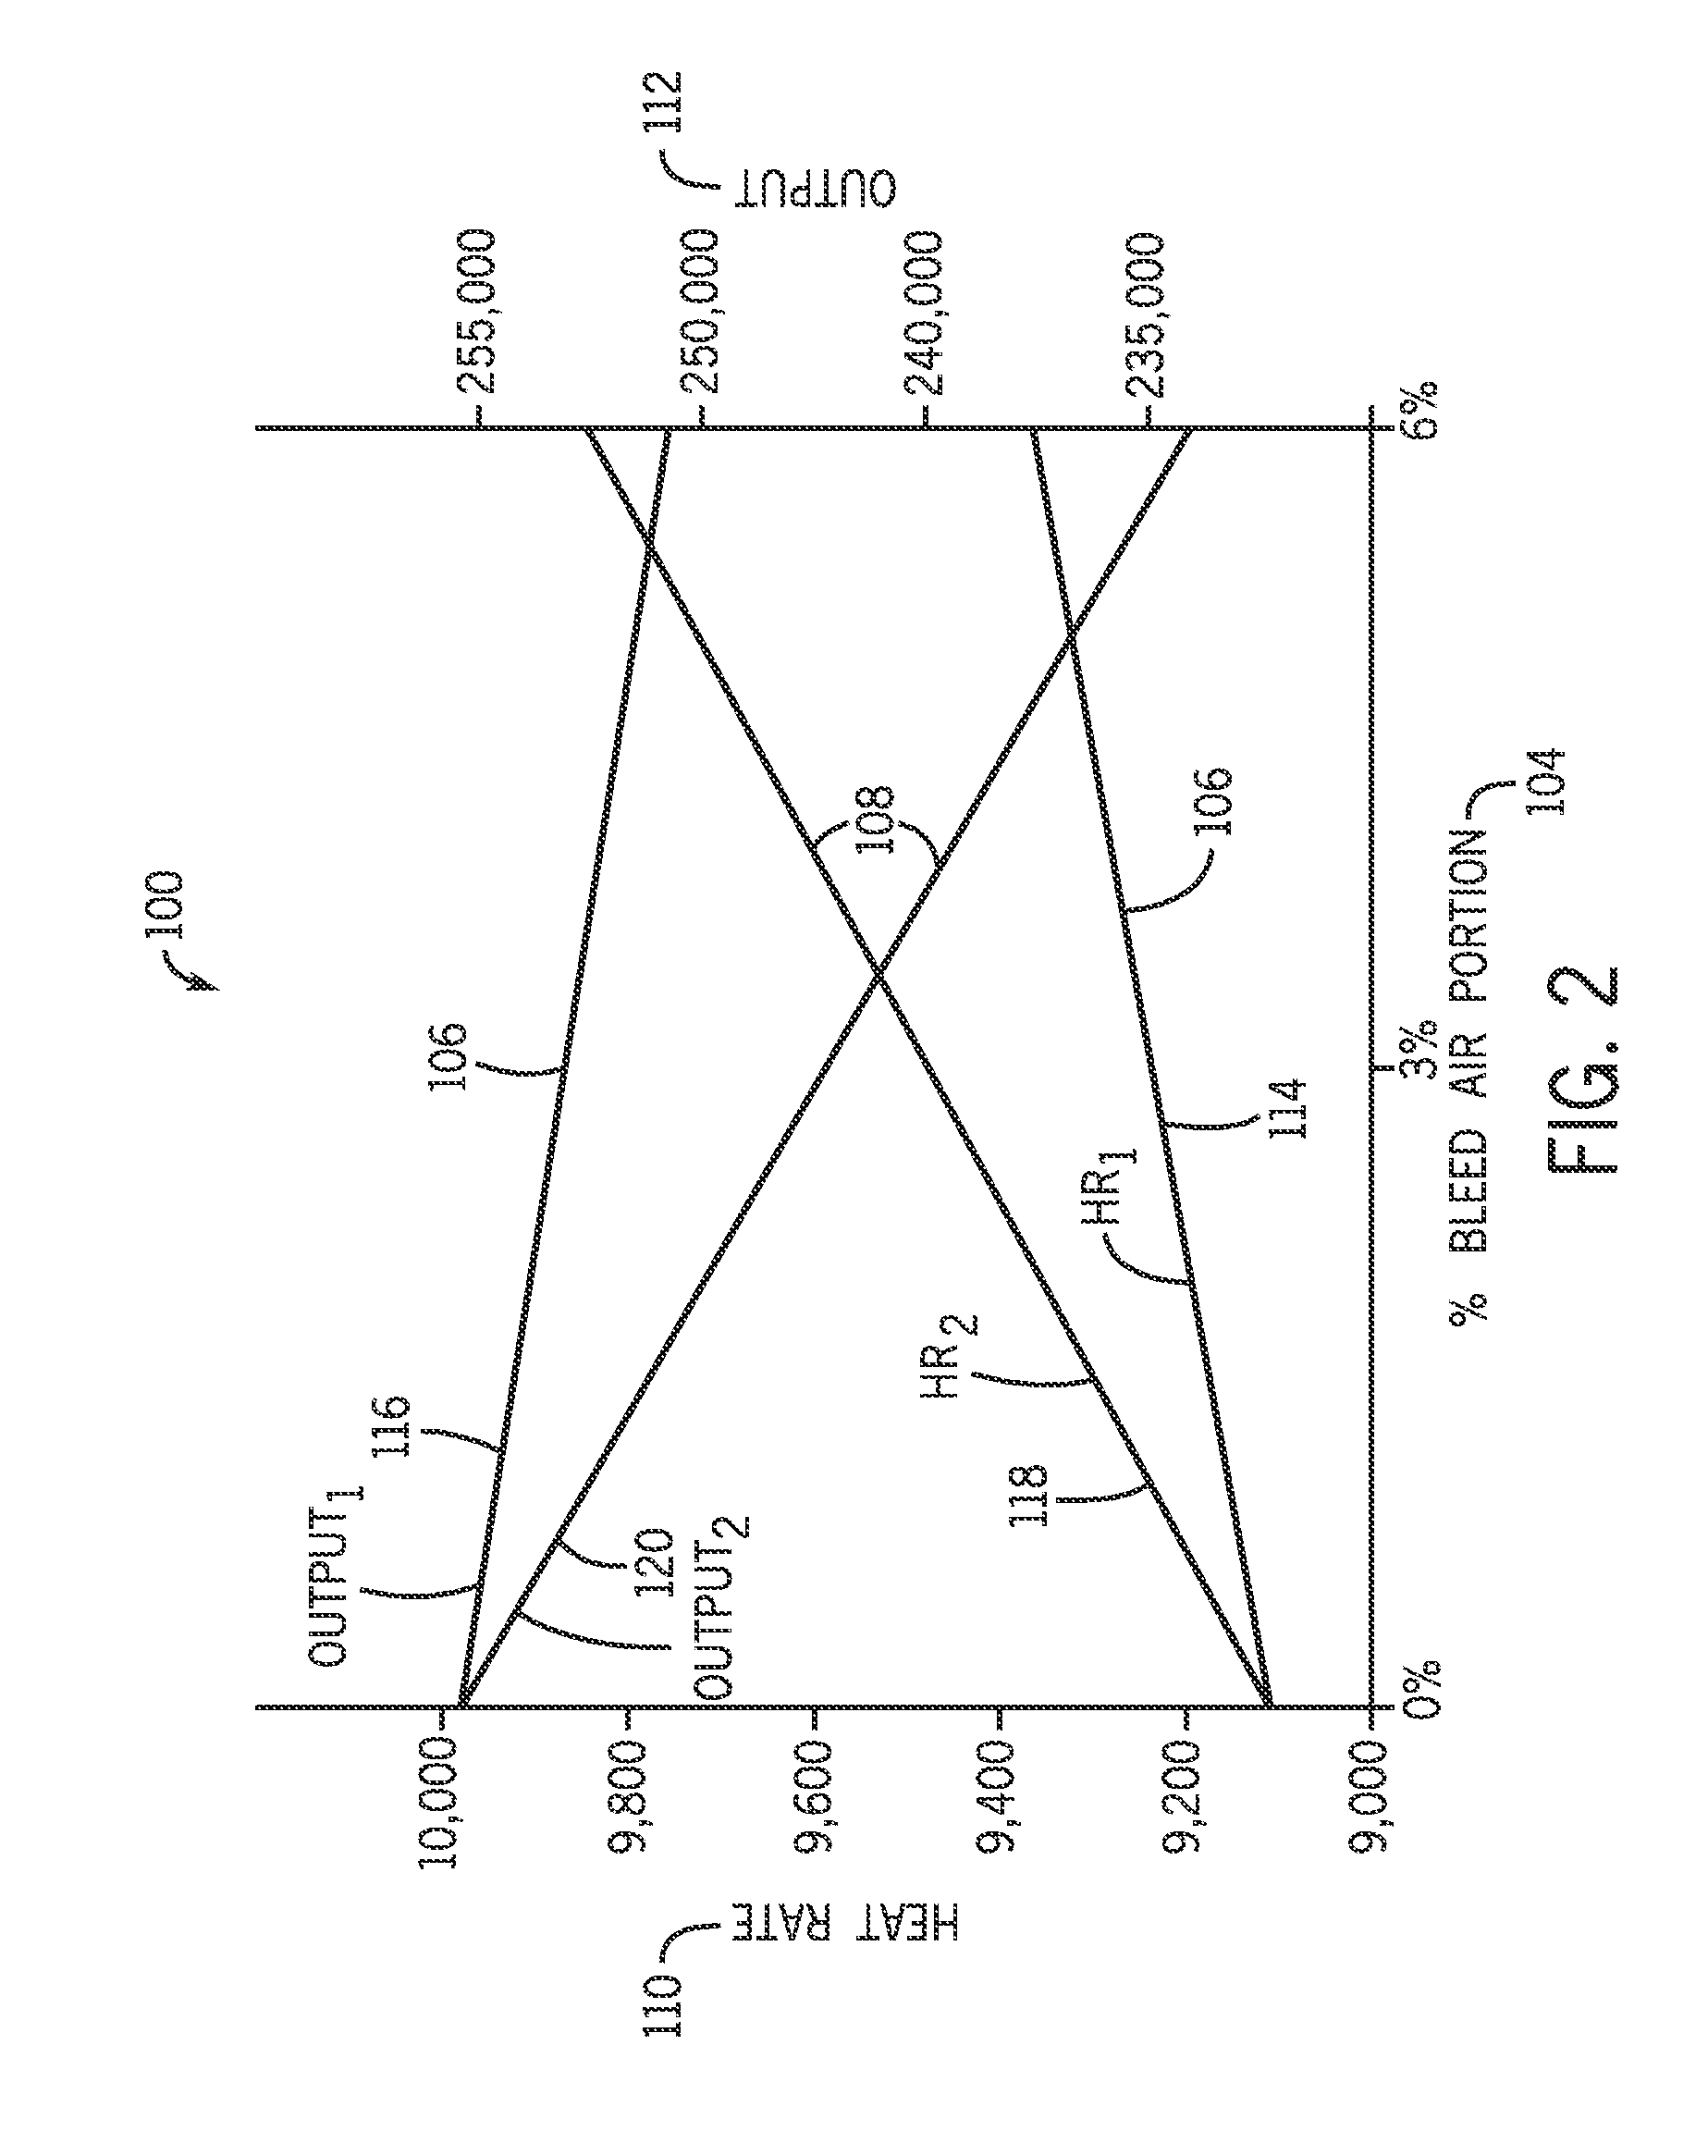 System and method for recirculating and recovering energy from compressor discharge bleed air